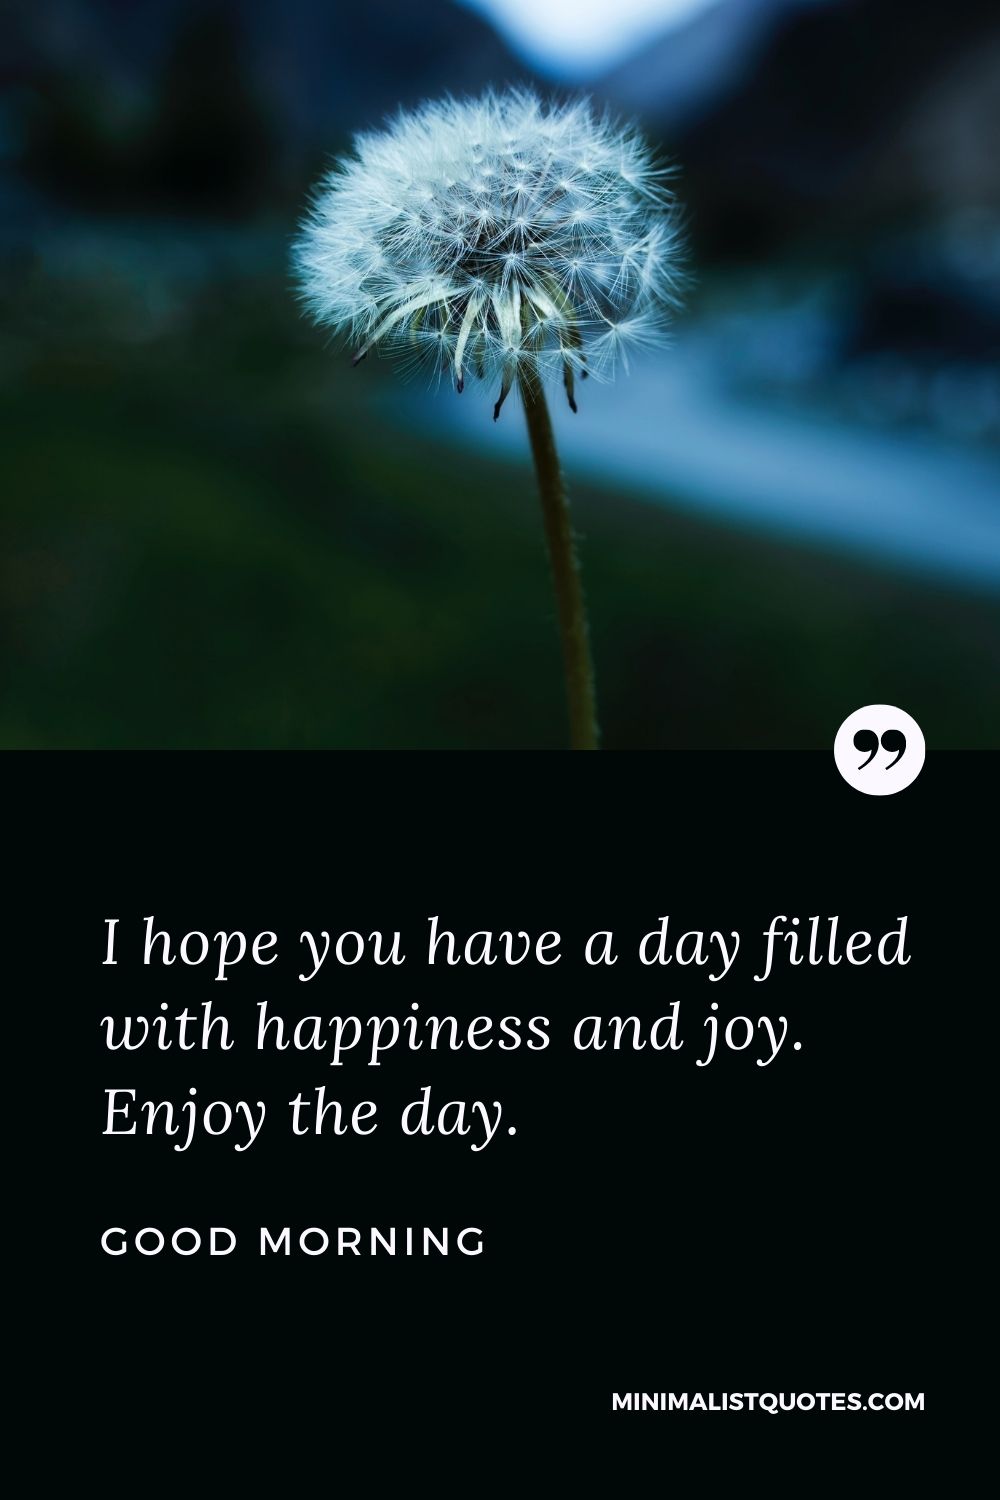 Good Morning Wish & Message With Image: I hope you have a day filled with happiness and joy. Enjoy the day.